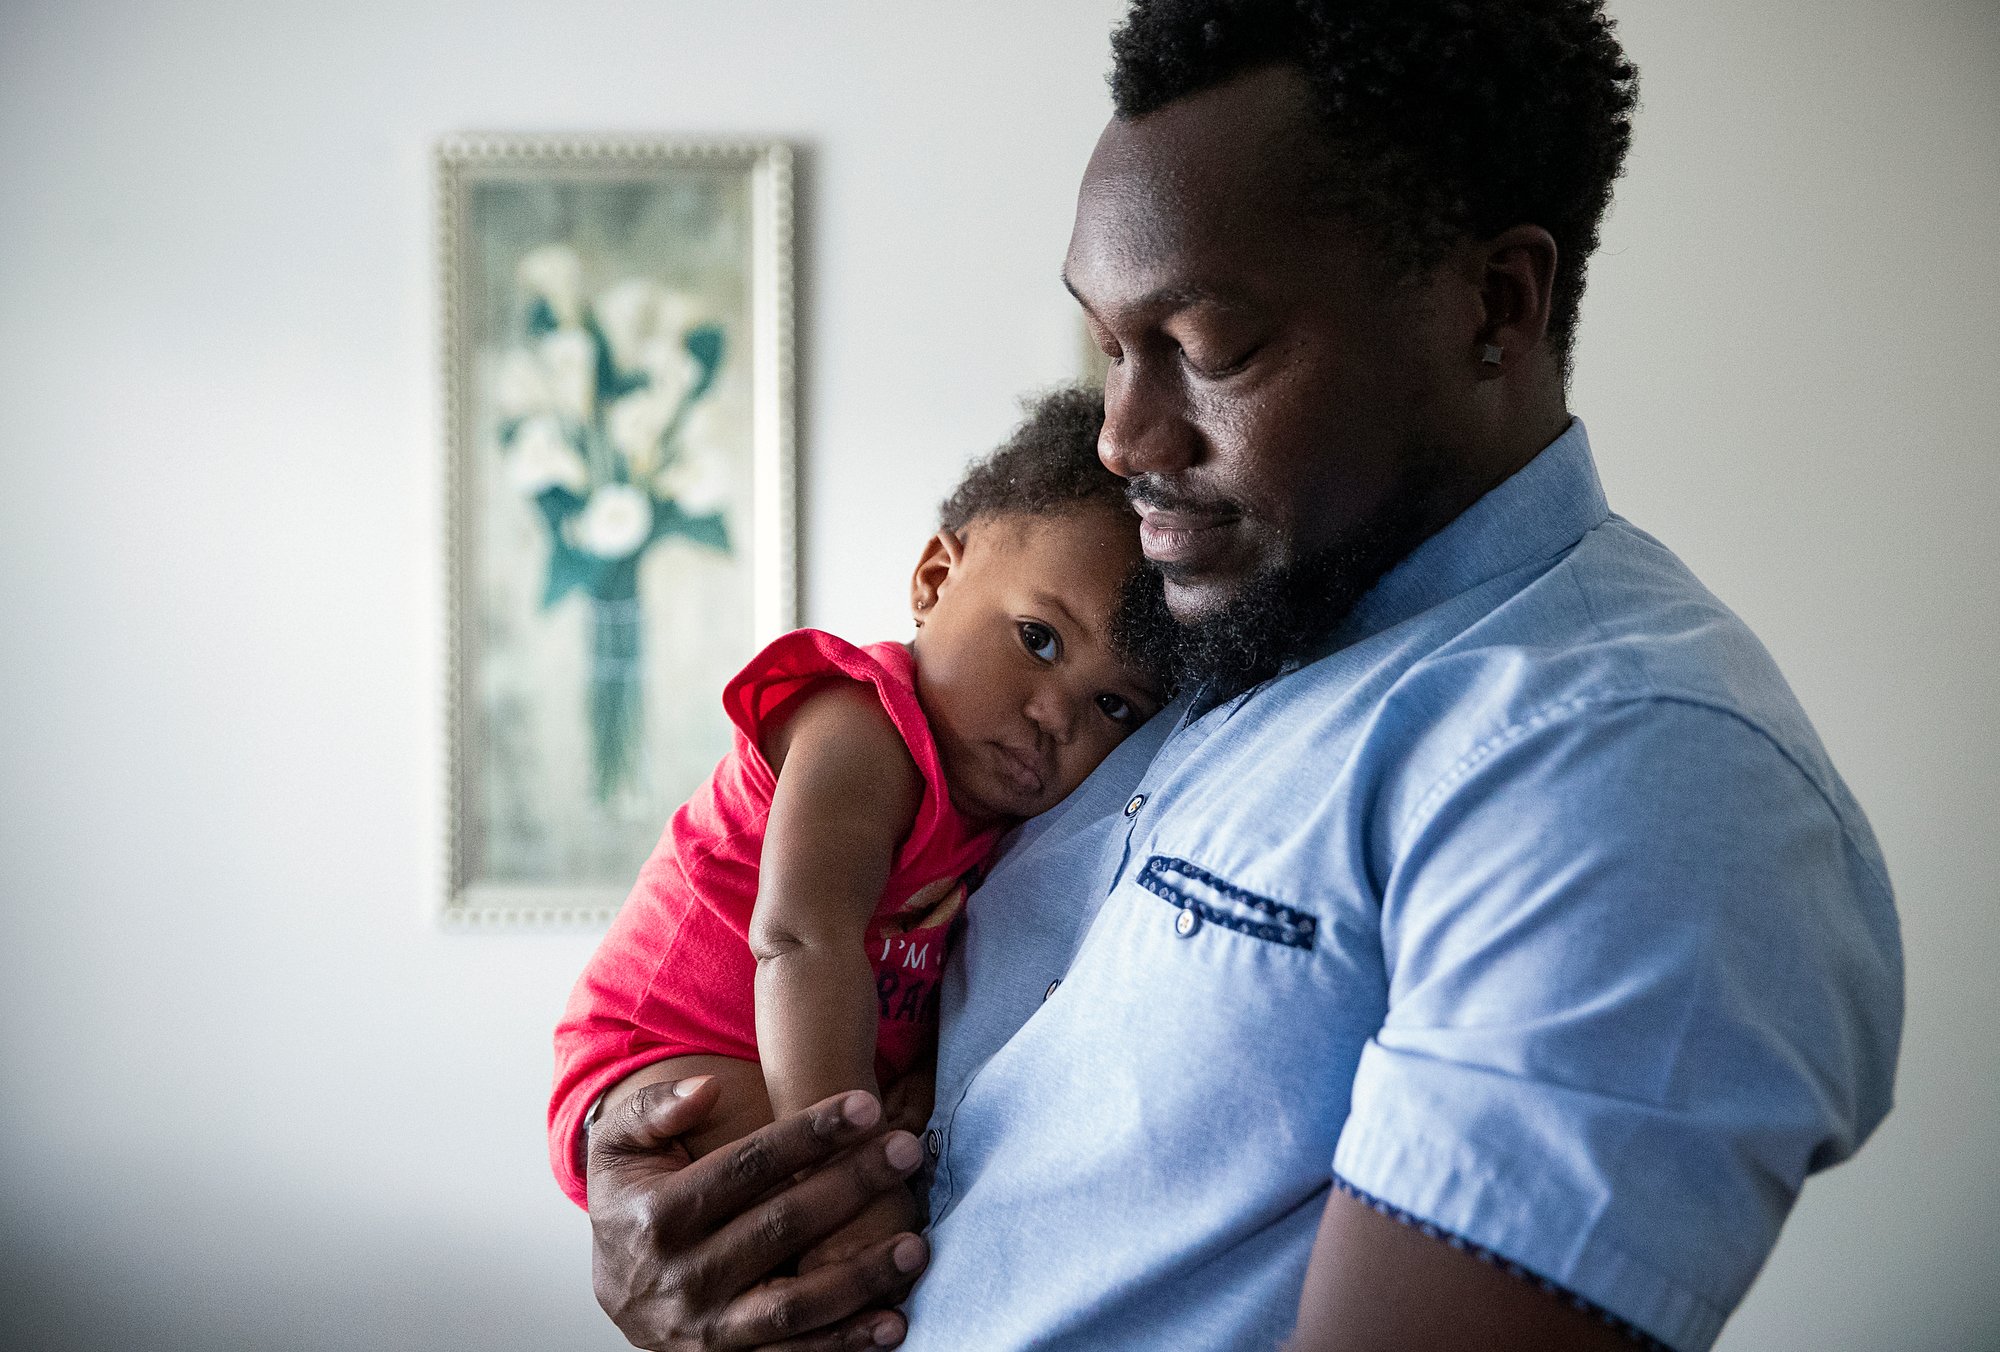  Anthony Wallace holds his daughter Charlotte, pictured at 10 months old, at his Indianapolis home on Thursday, Aug. 19, 2021. Anthony's wife Chaniece died from complications of preeclampsia a few days after giving birth to Charlotte by emergency c-s